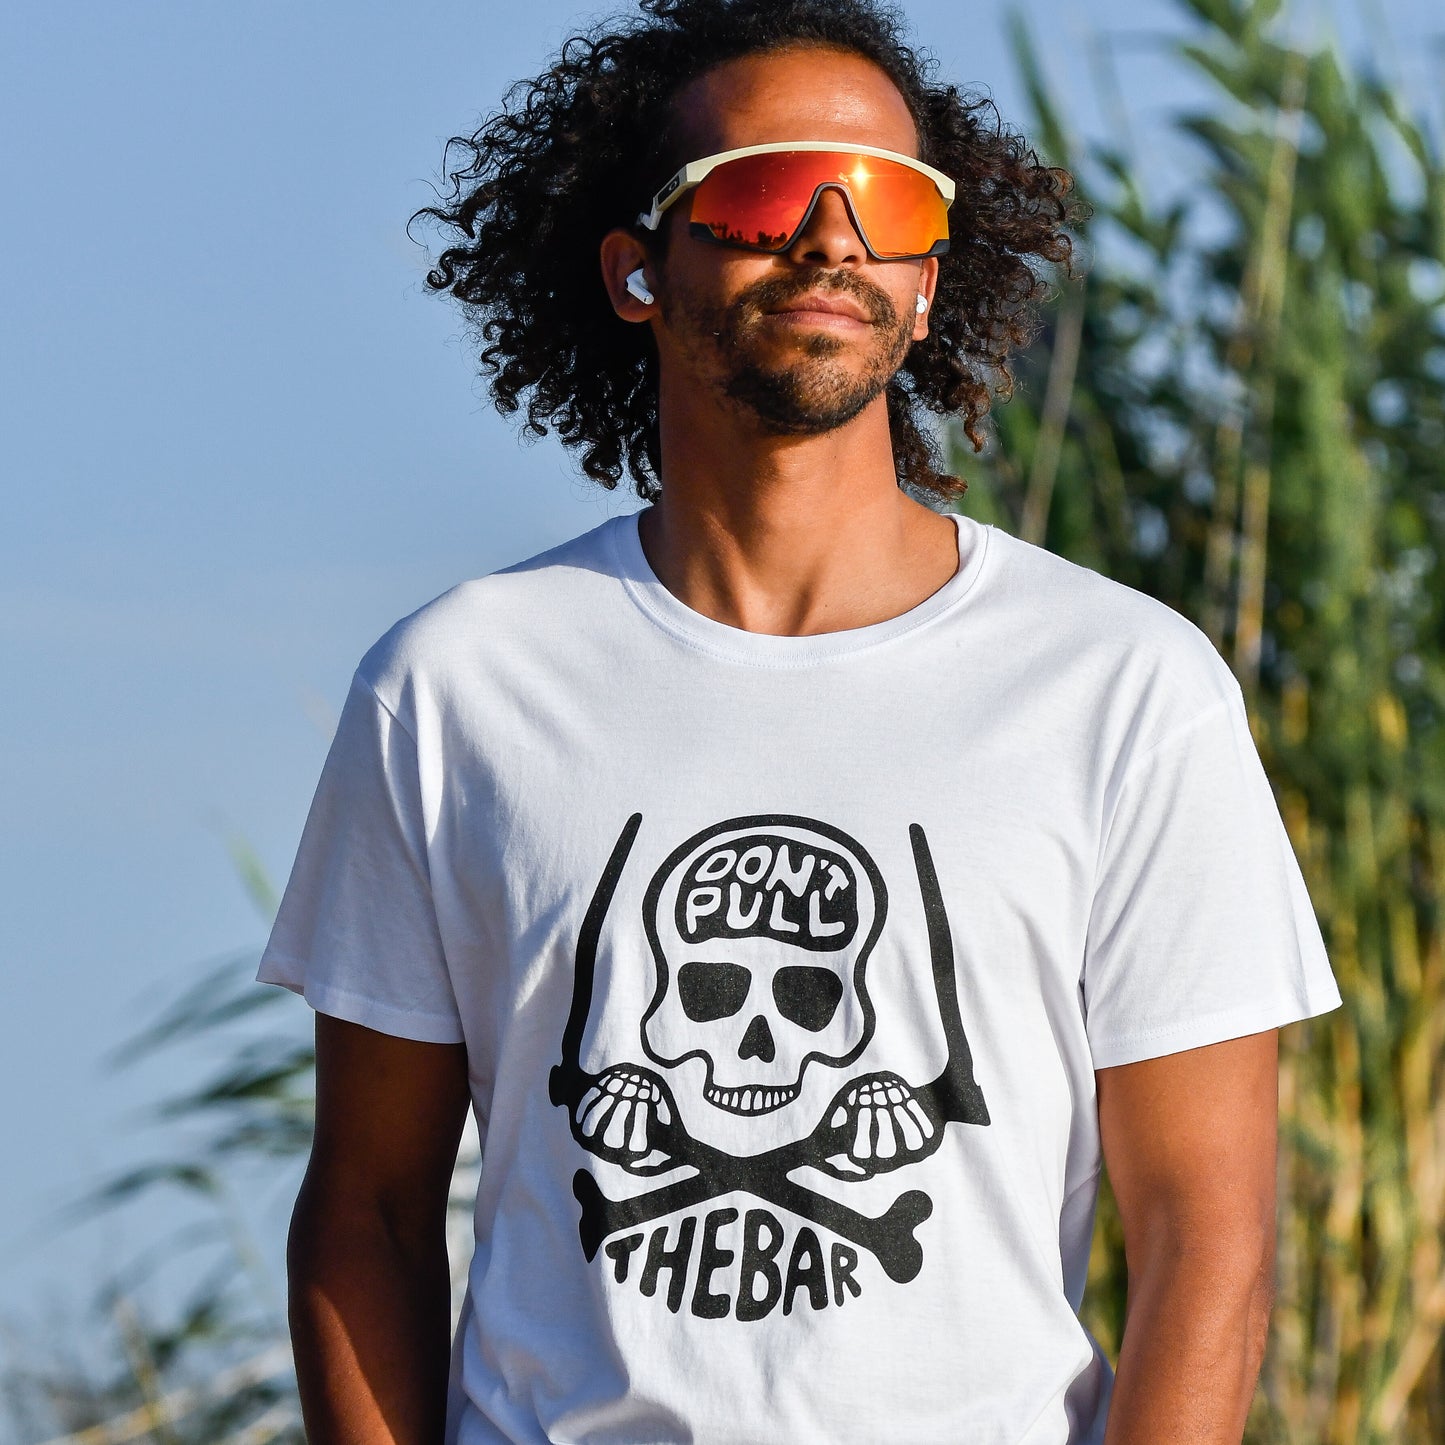 Must-have Kiter's Tee